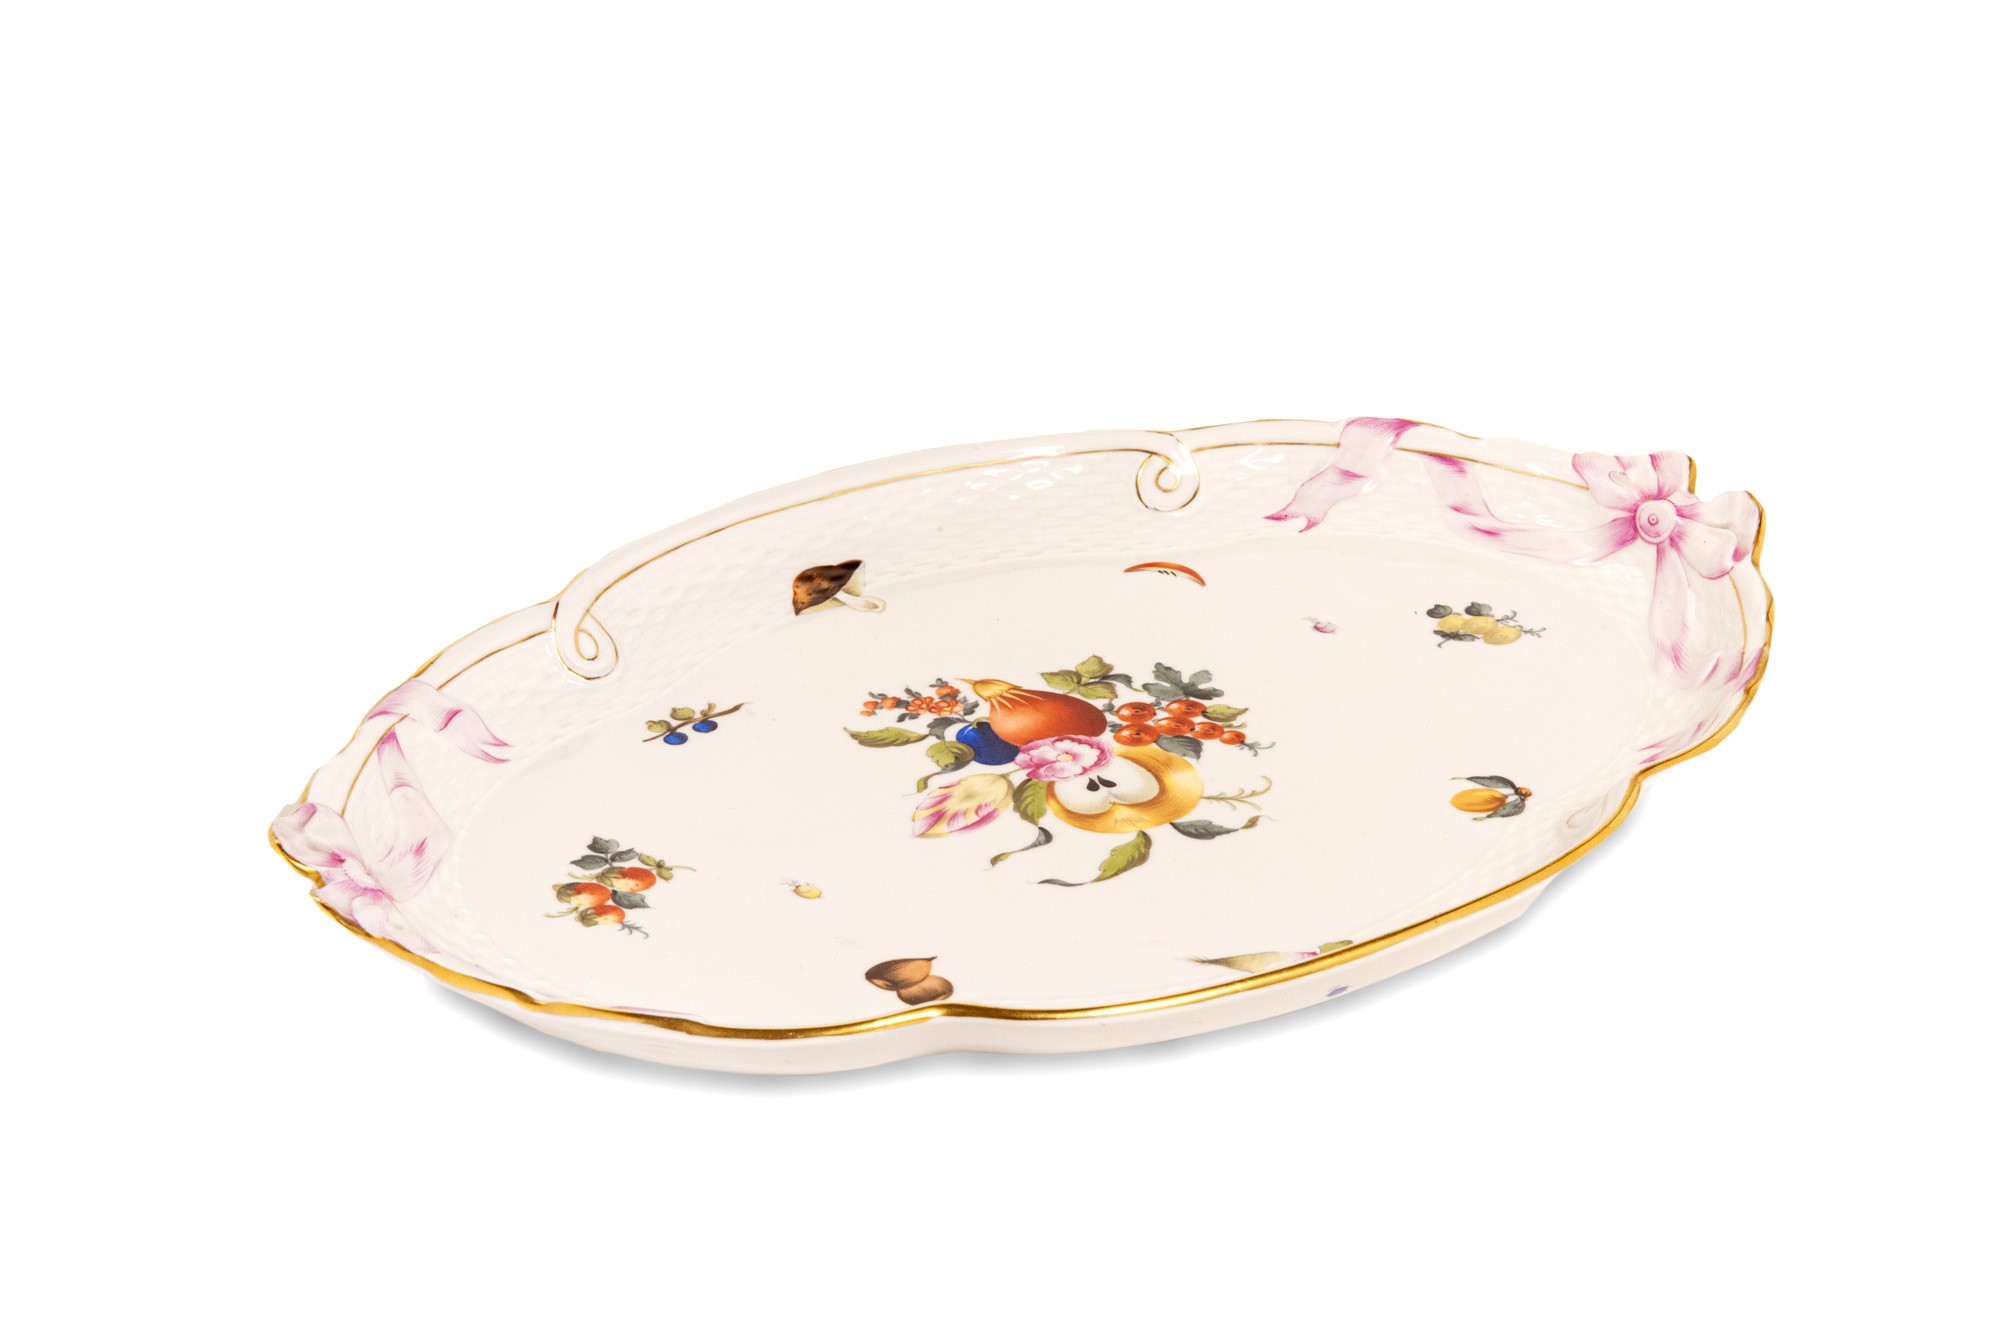 Herend white porcelain tray Hungary, '50, decorated with flowers and fruit, hand painted41 x 48.5